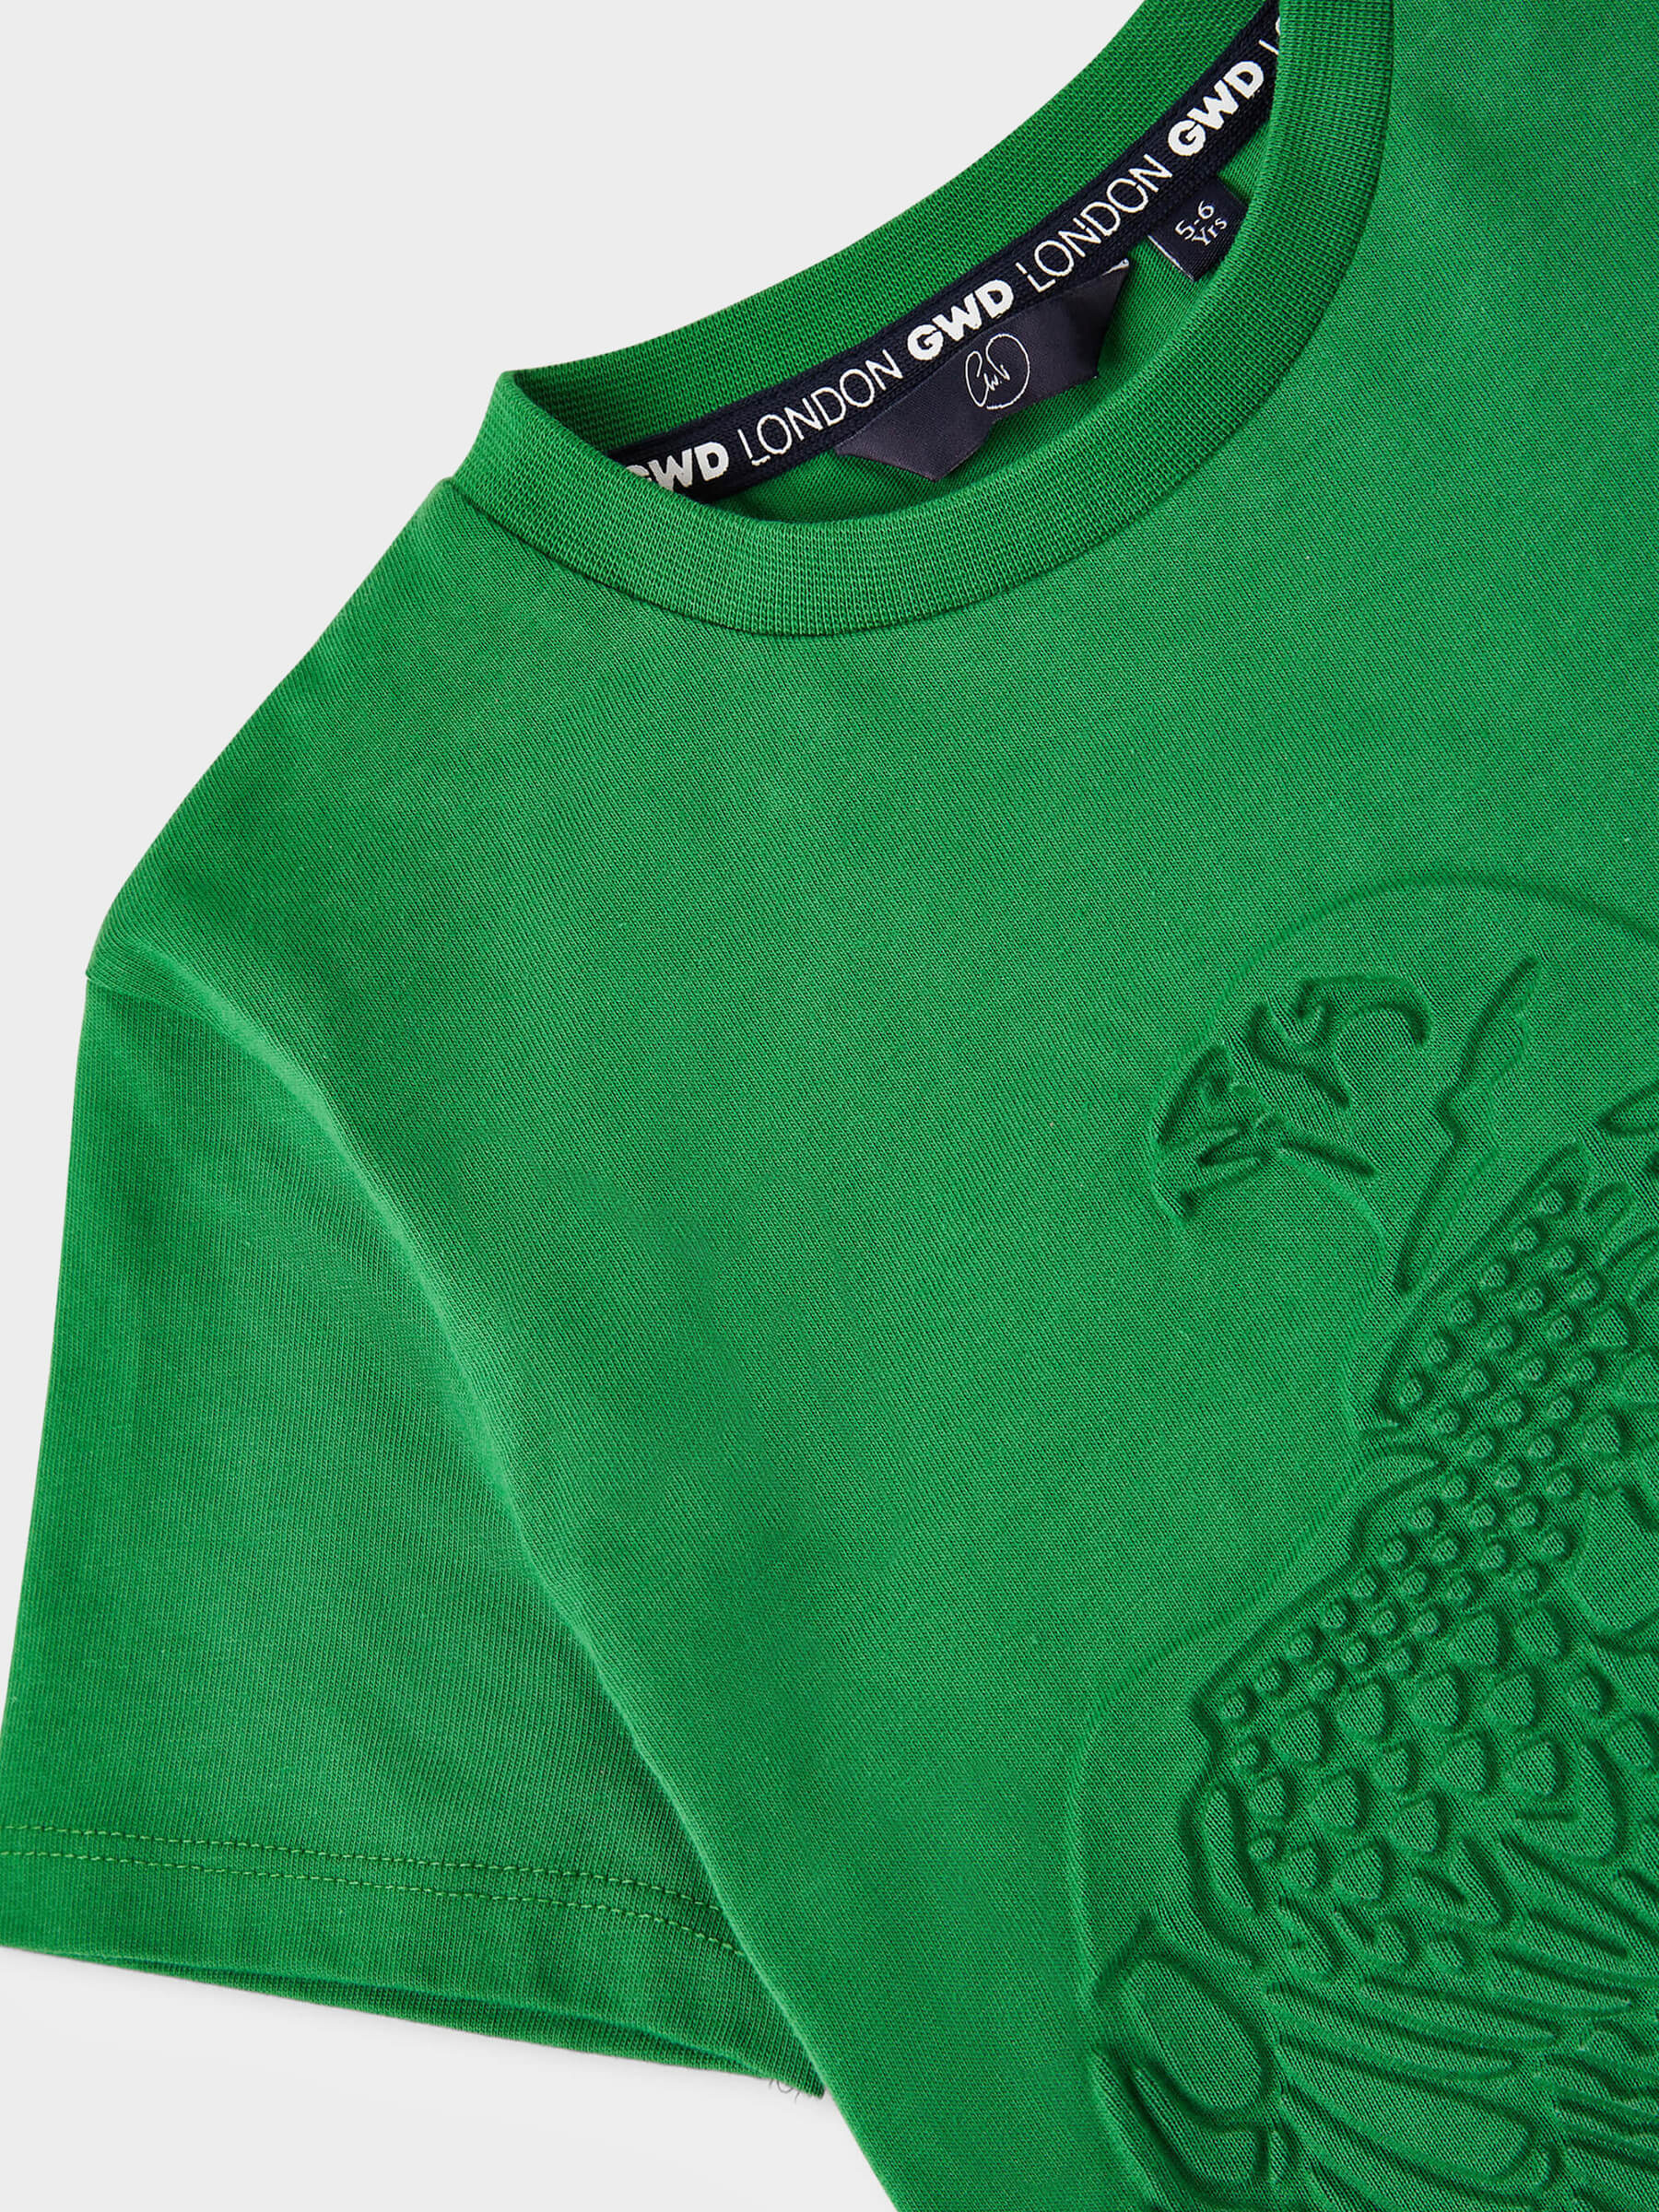 Falcon Embossed T-Shirt